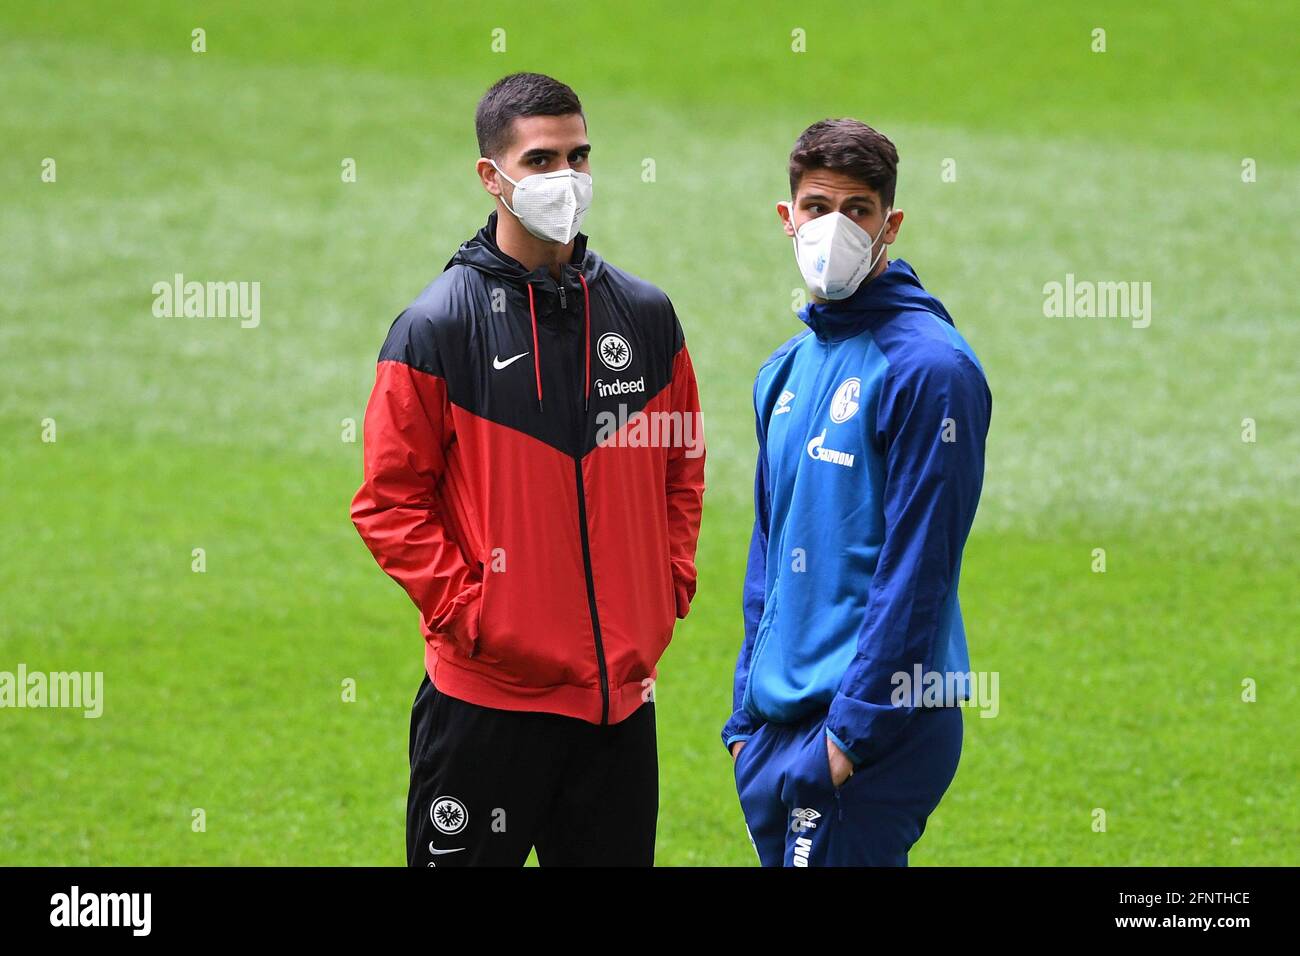 left to right Andre SILVA (F), Goncalo PACIENCIA (GE) before the game, Soccer 1. Bundesliga, 33rd matchday, FC Schalke 04 (GE) - Eintracht Frankfurt (F) 4: 3, on May 15, 2021 in Gelsenkirchen/Germany. # DFL regulations prohibit any use of photographs as image sequences and/or quasi-video ¬ Stock Photo